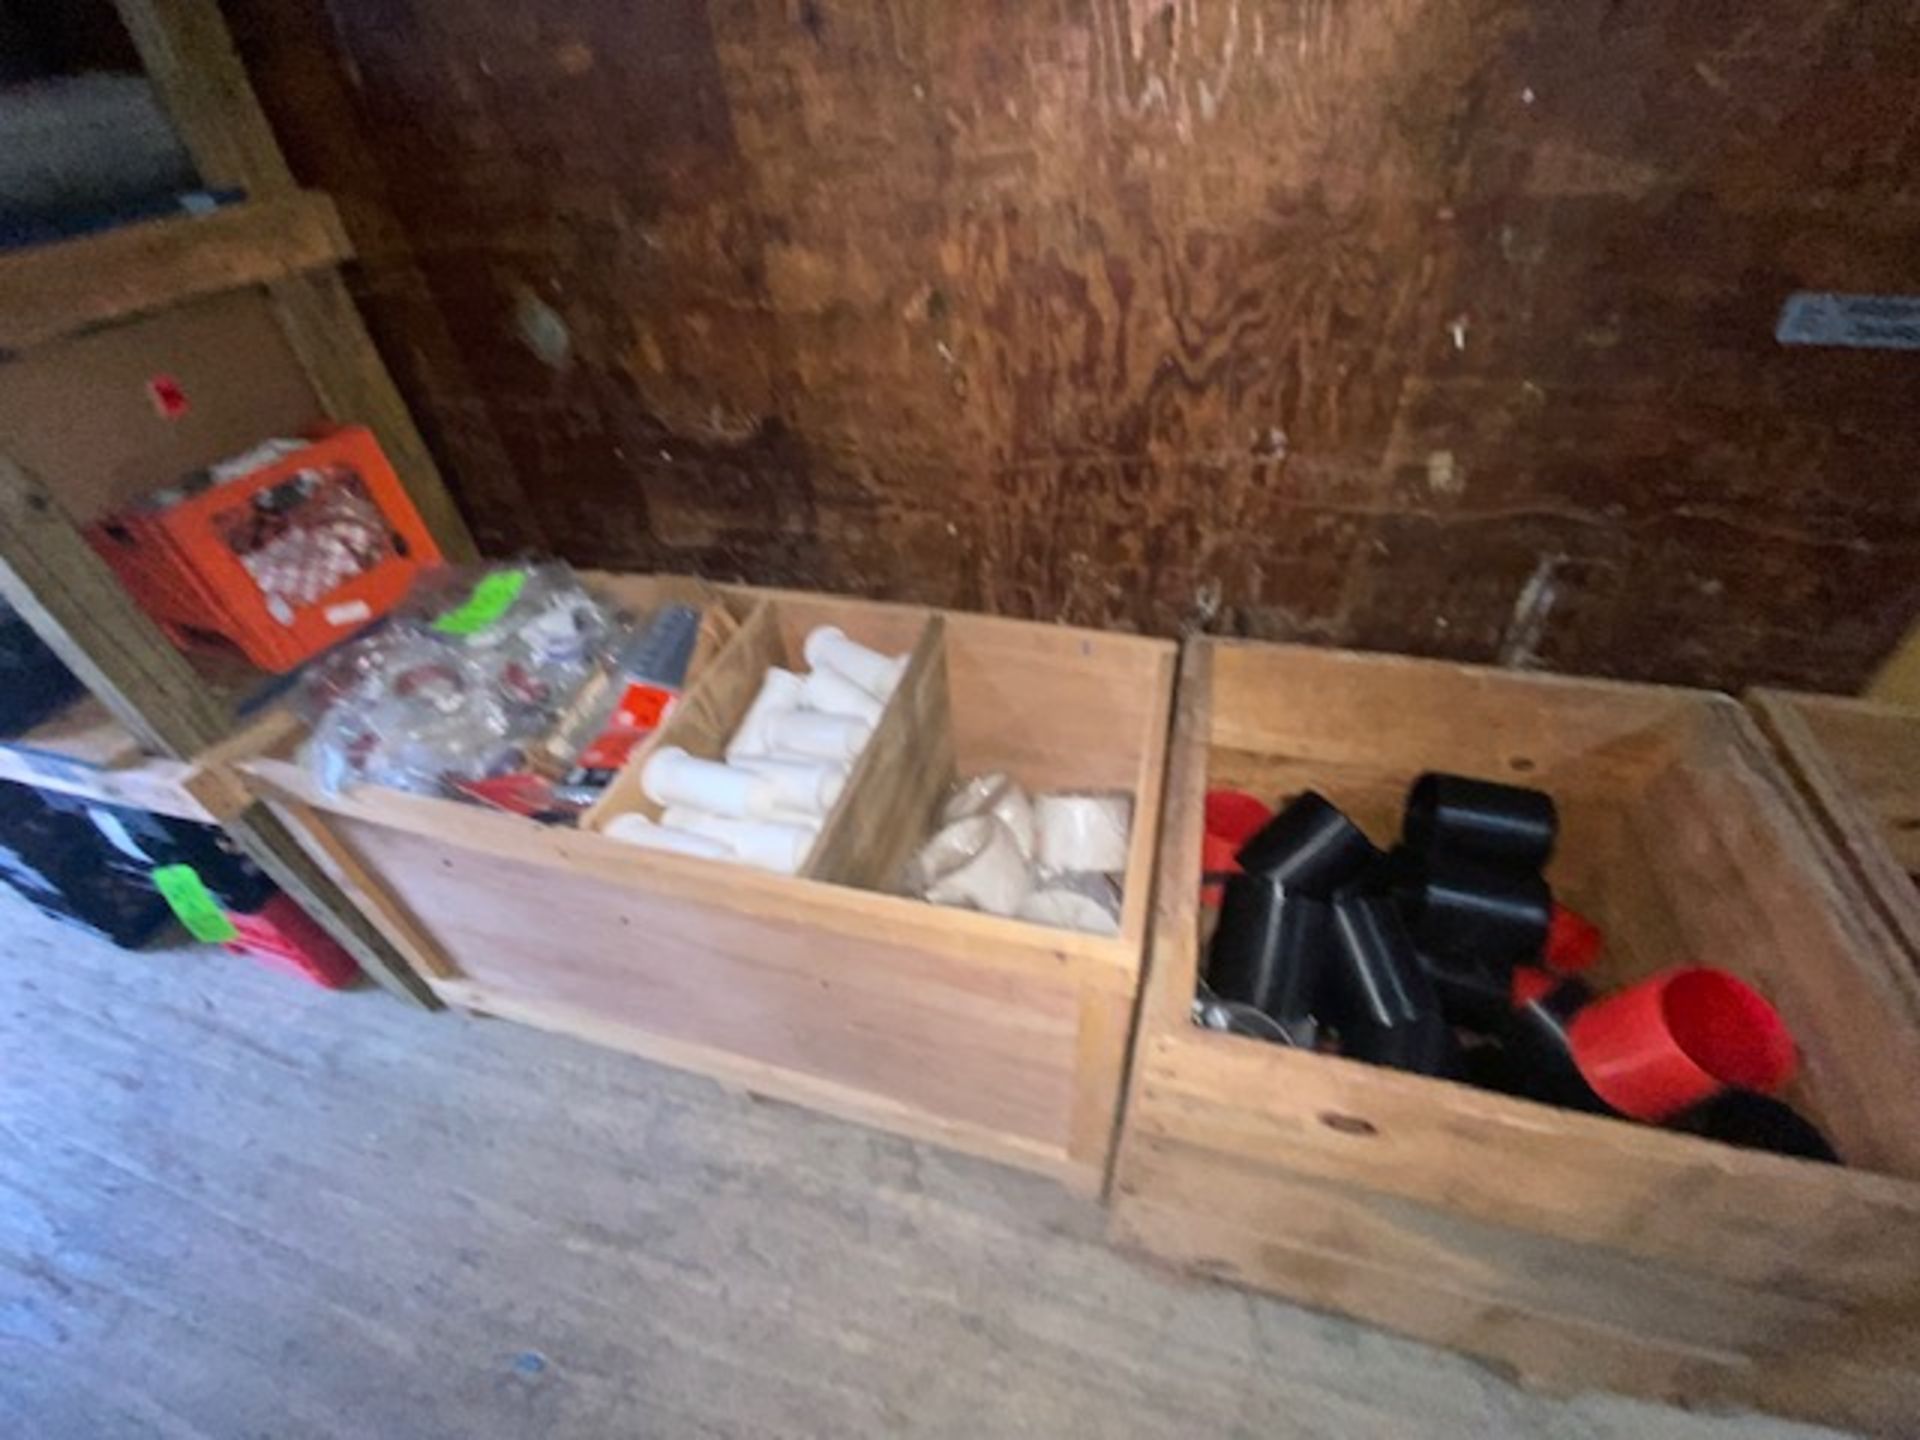 (3) Wooden Crates with Contents, Includes Fire Proof Items, Includes 1-1/2" Firestep Collars, 2"